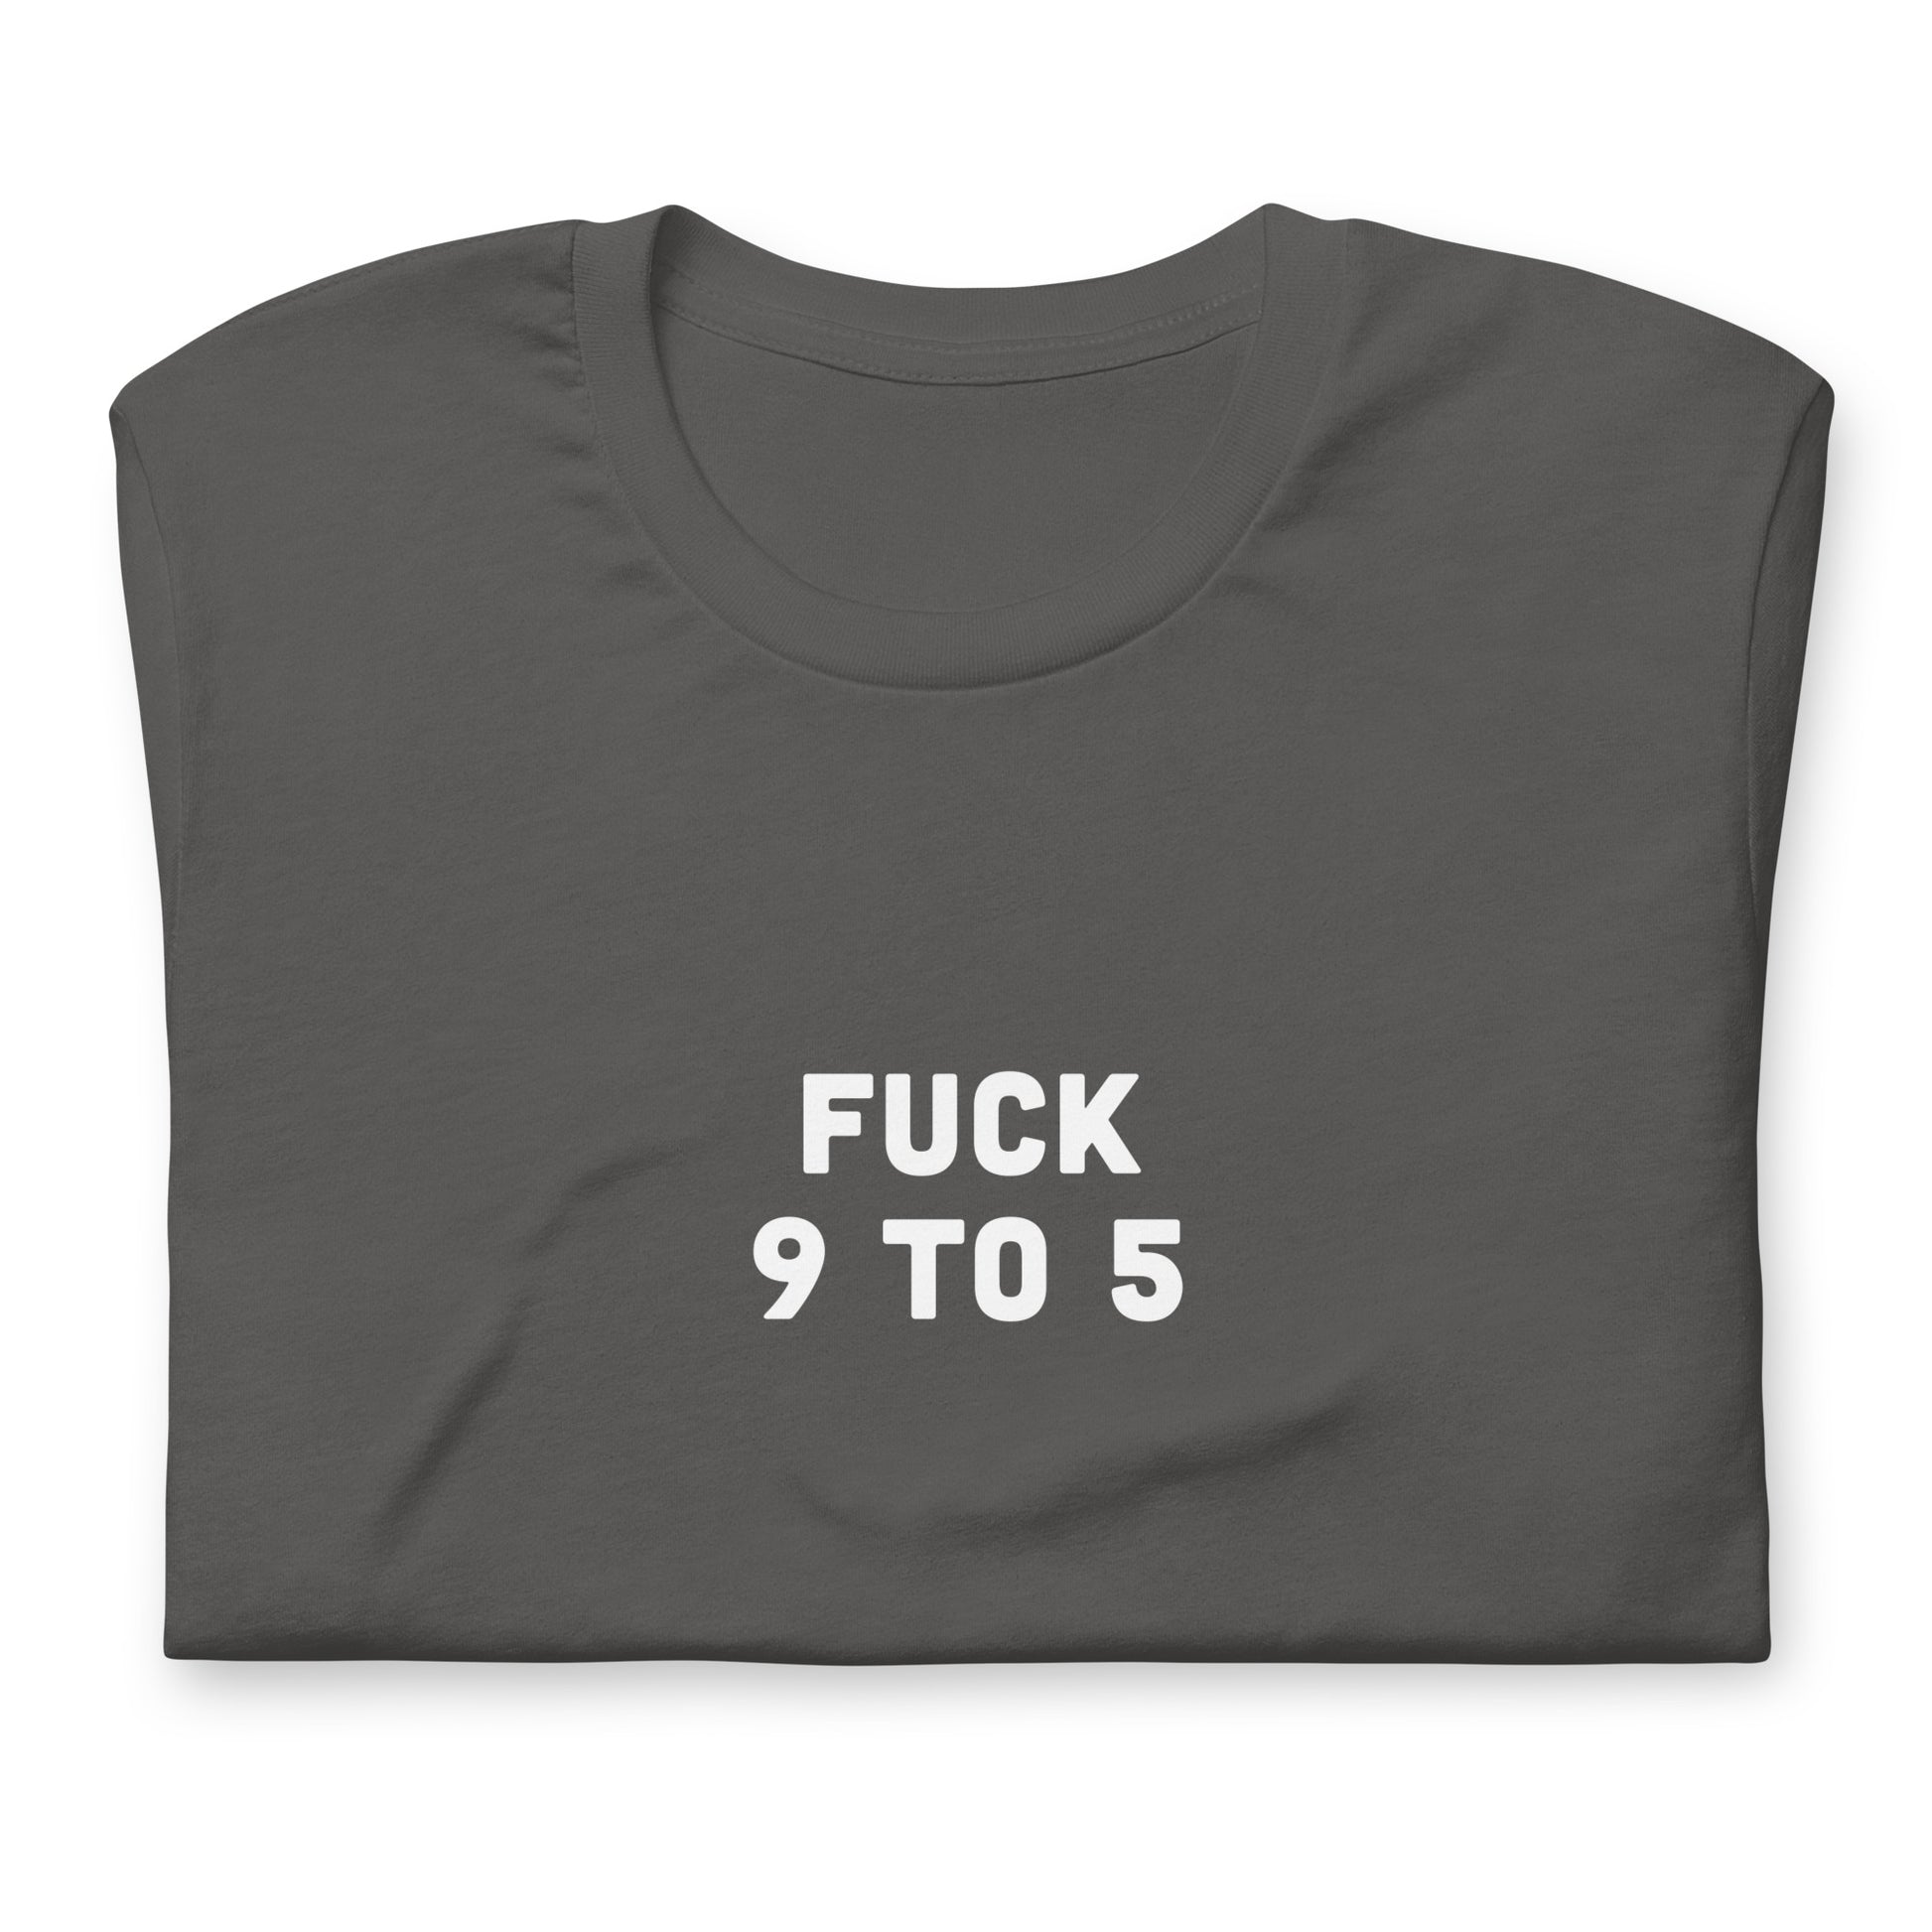 Fuck 9 To 5 T-Shirt Size S Color Black